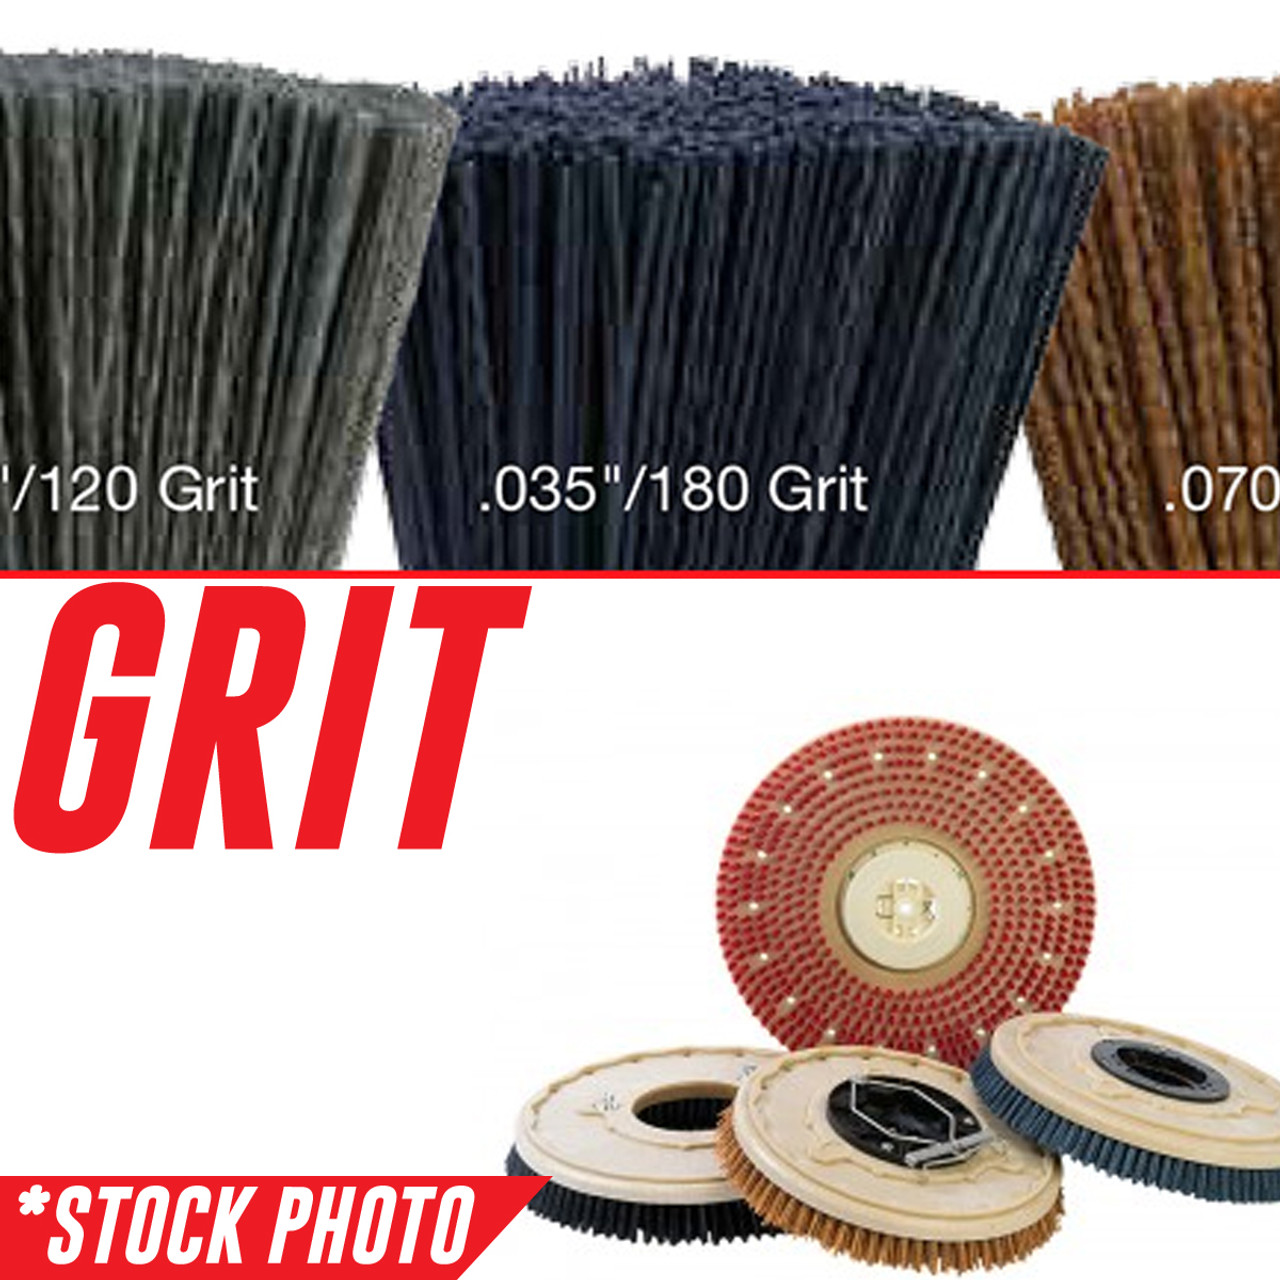 15-421SS: 14" Rotary Brush .070"/46 Grit fits Factory Cat Models 29, XR-45